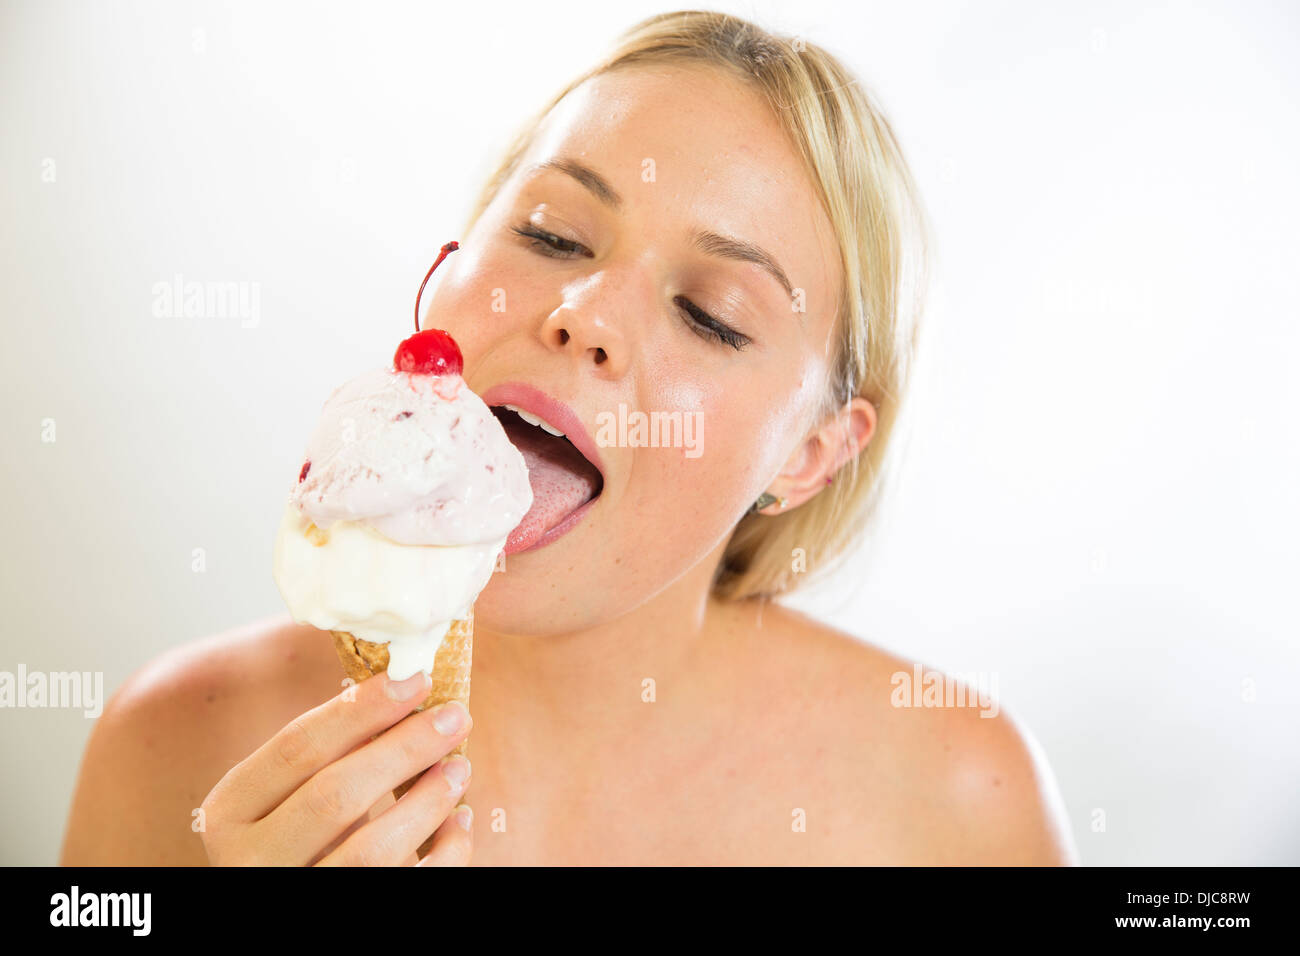 Young woman eating ice cream Stock Photo